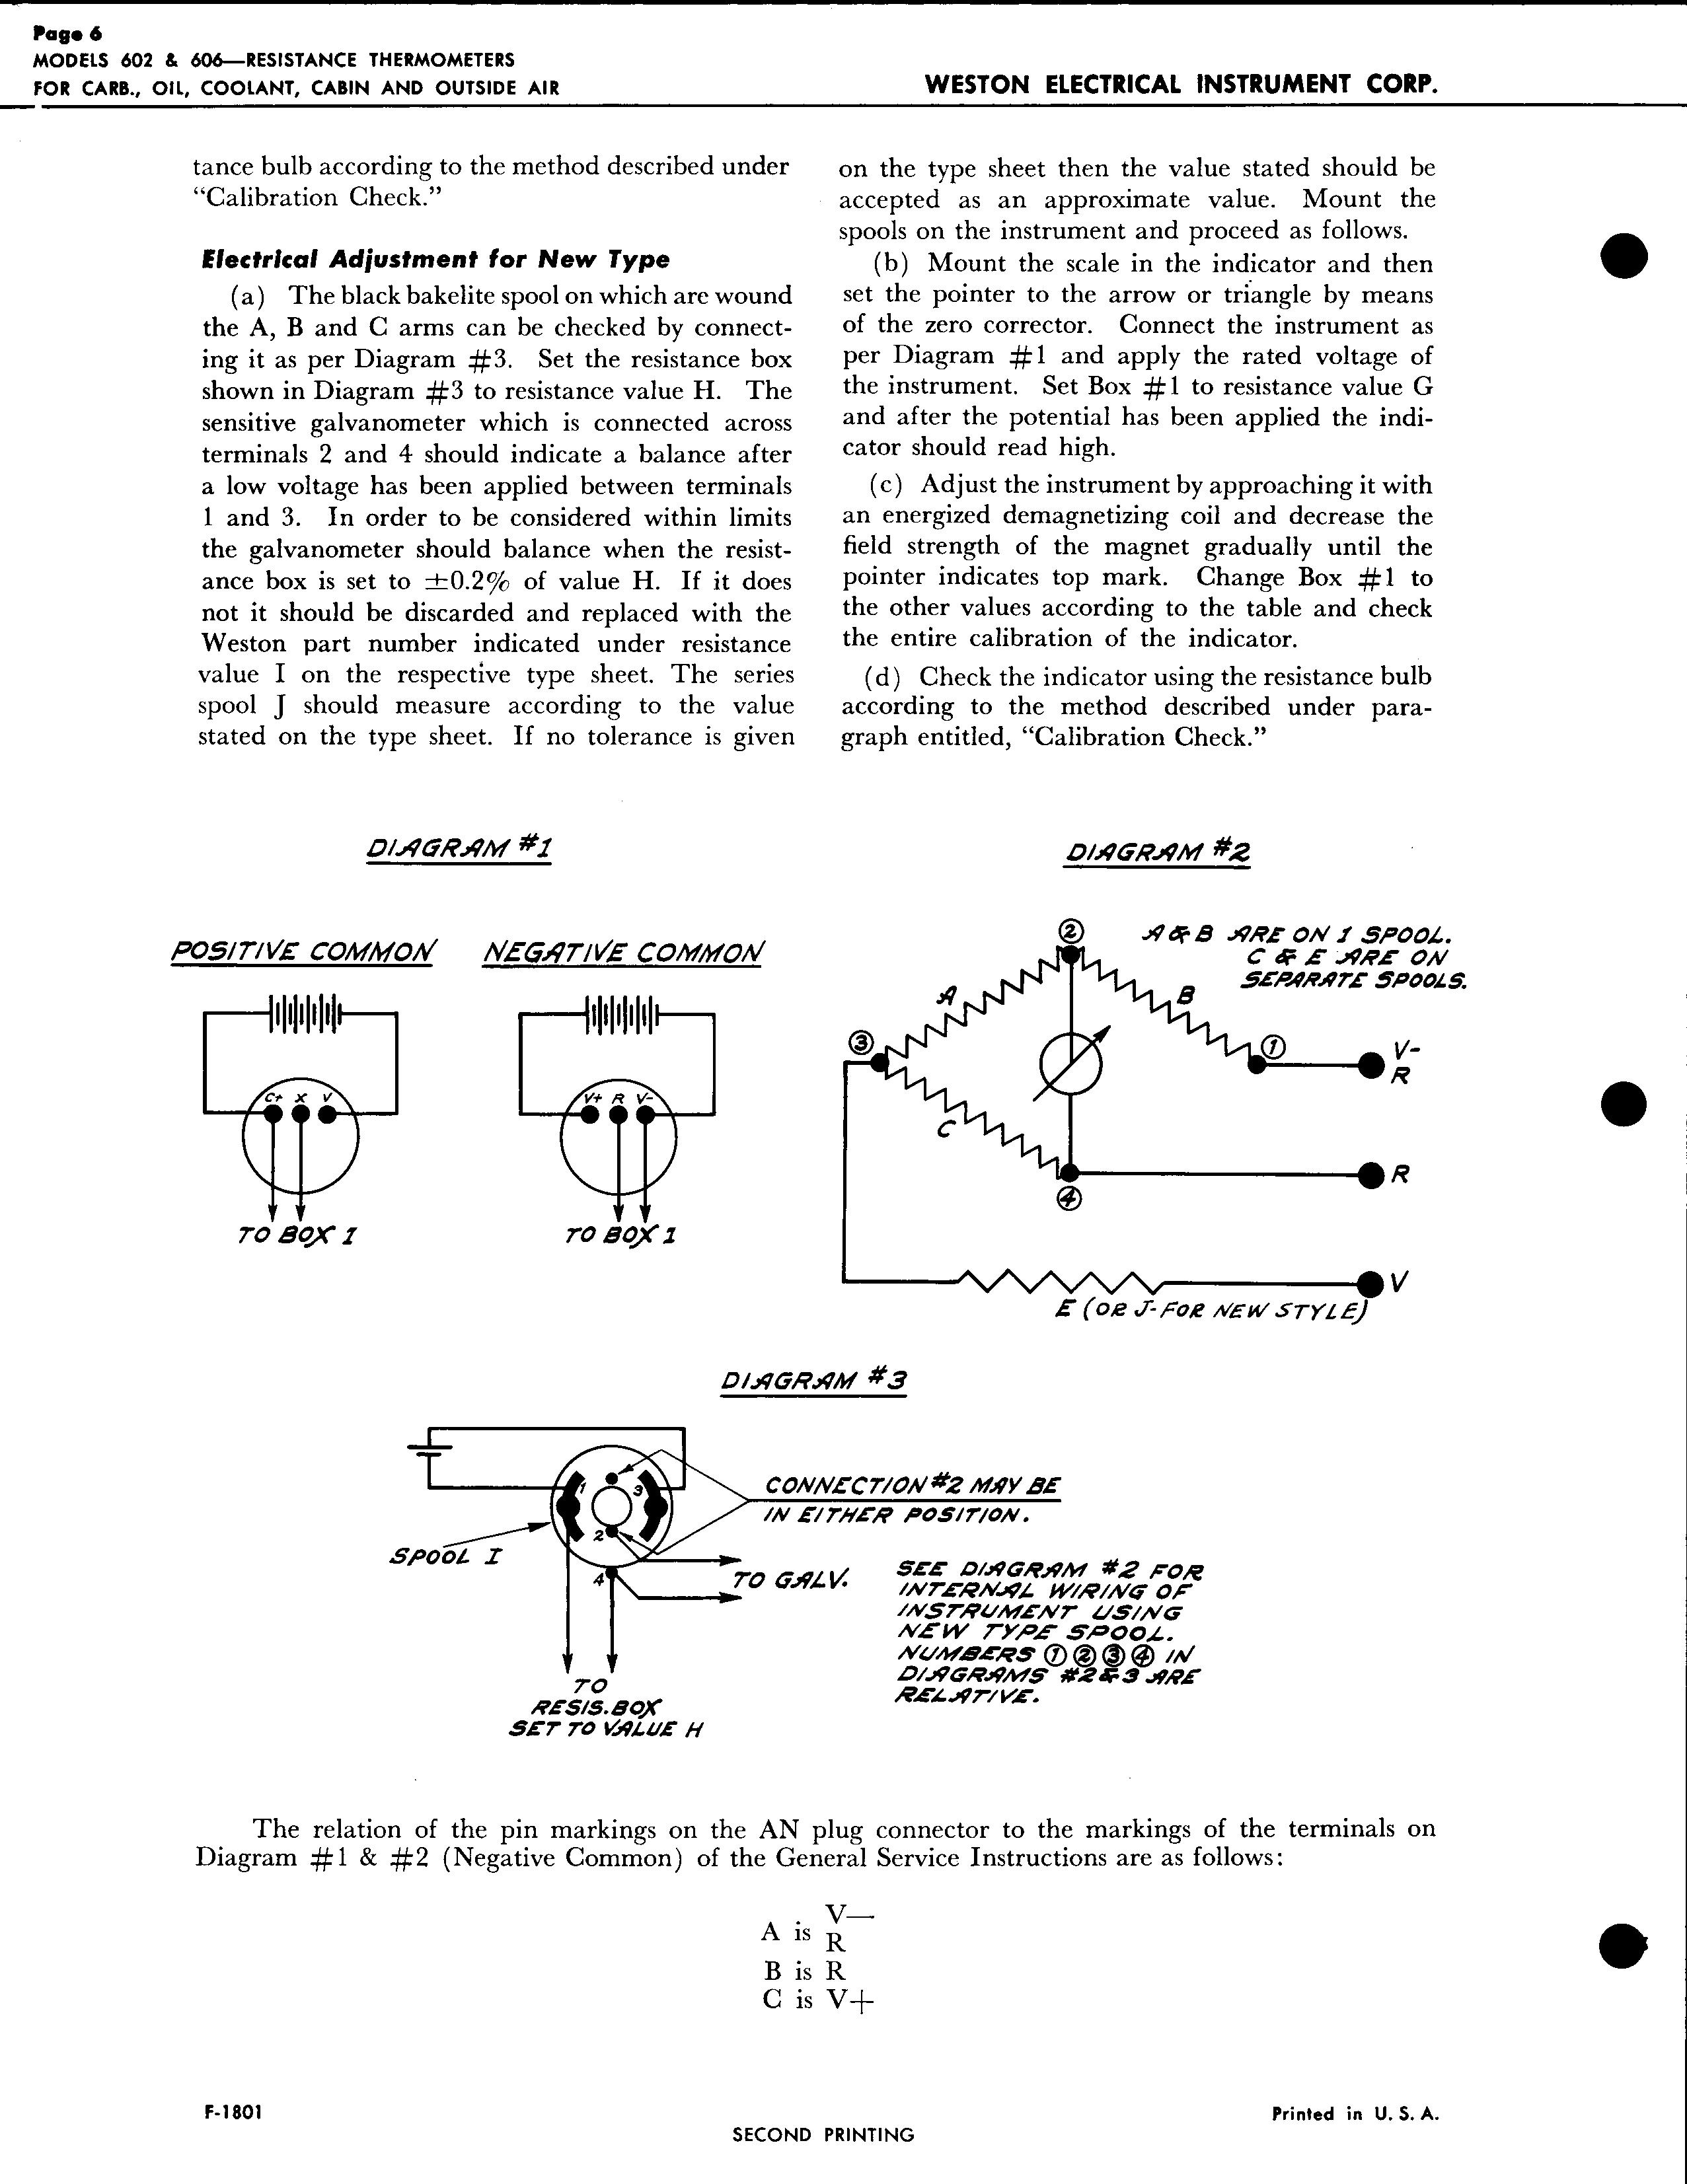 Sample page 6 from AirCorps Library document: Service Instructions for Models 602 & 606 Resistance Thermometers